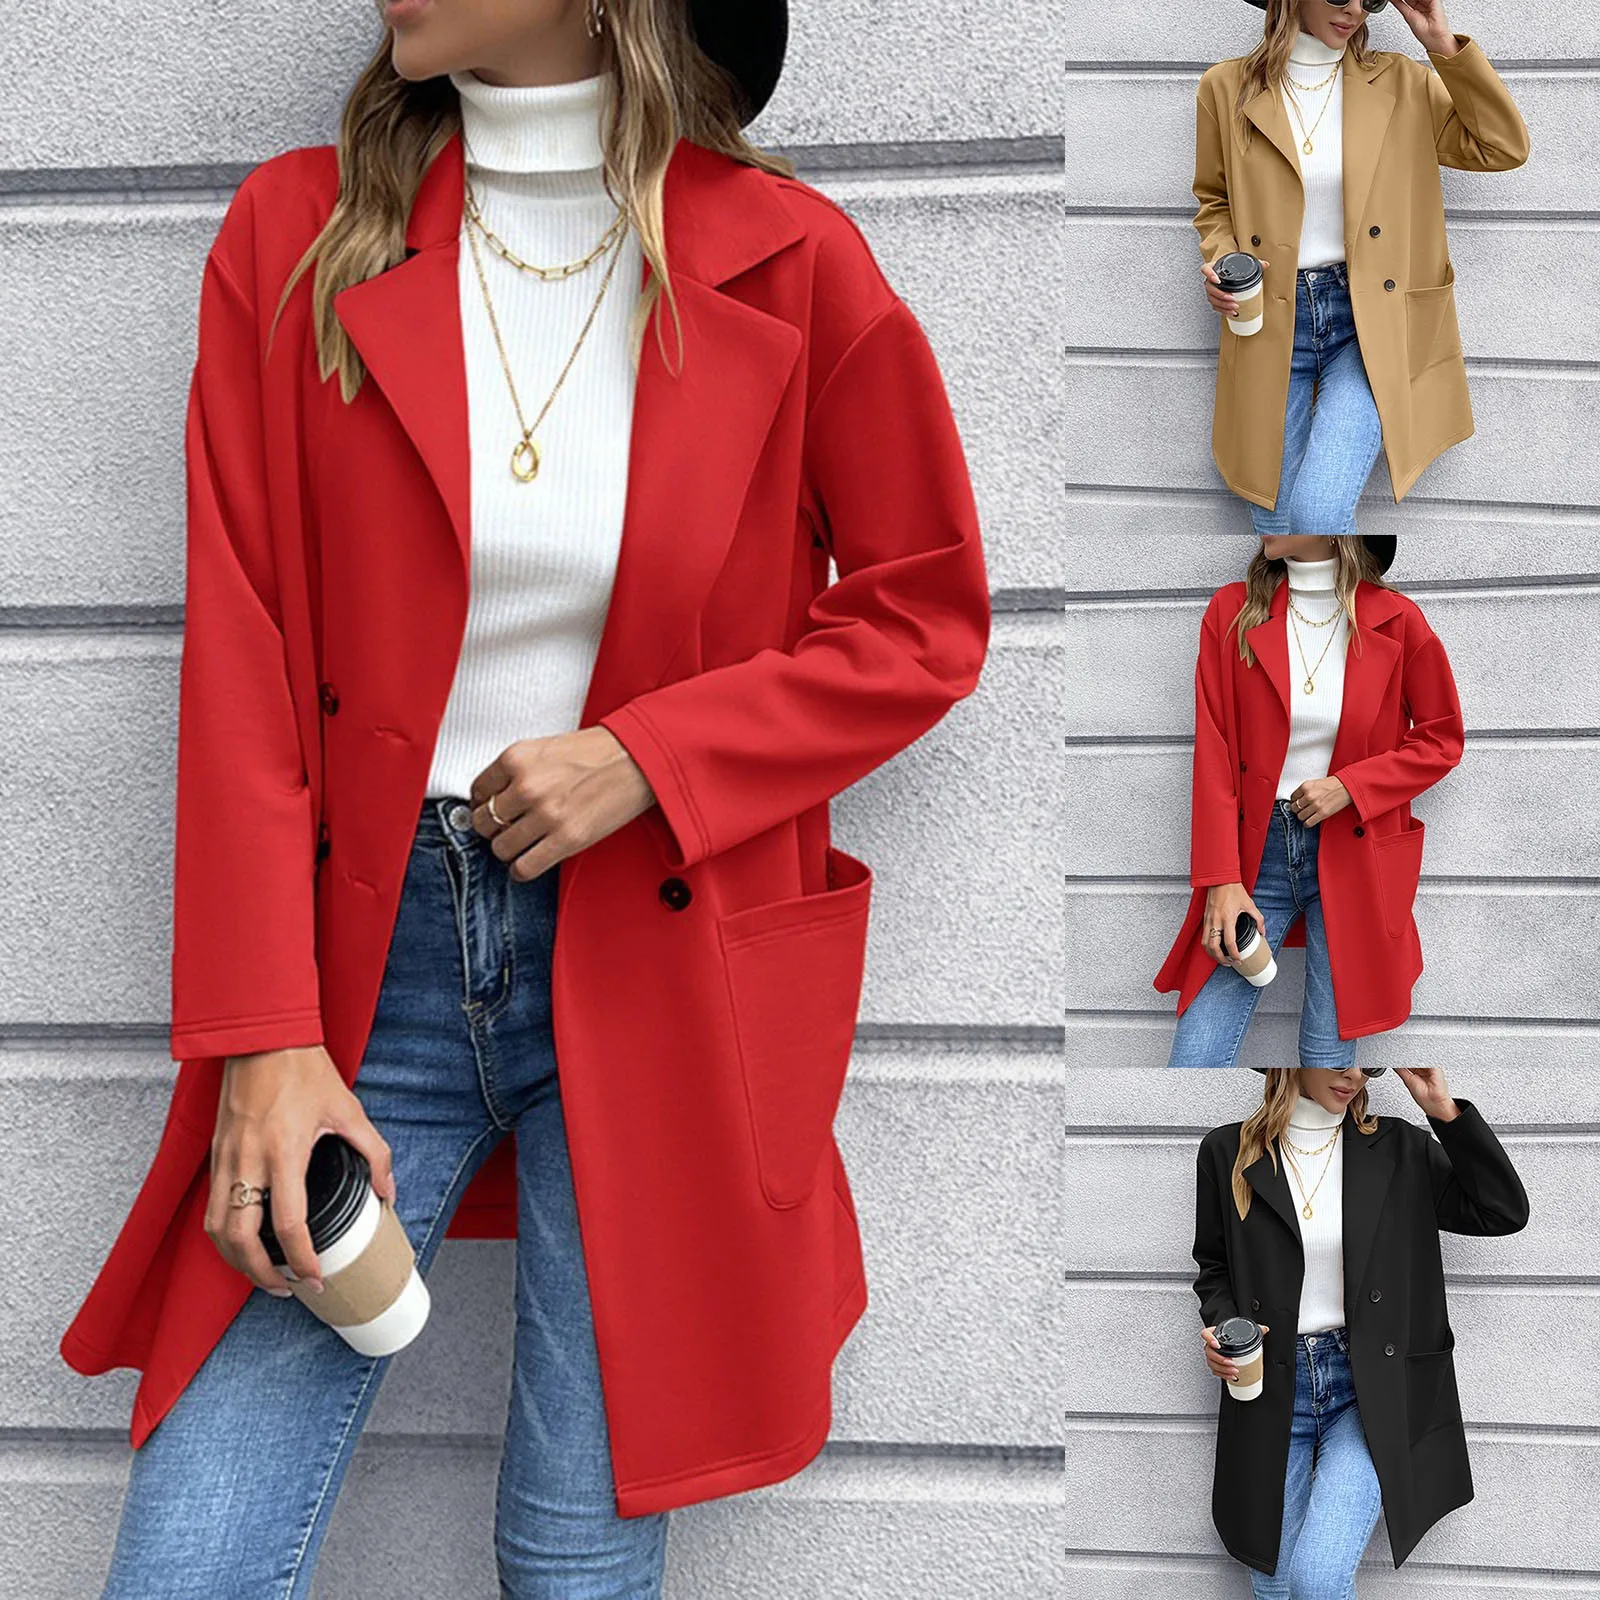 Women Medium Length Cardigan Double Knitted Suit Jacket Snow Jackets Woman Trench Coat